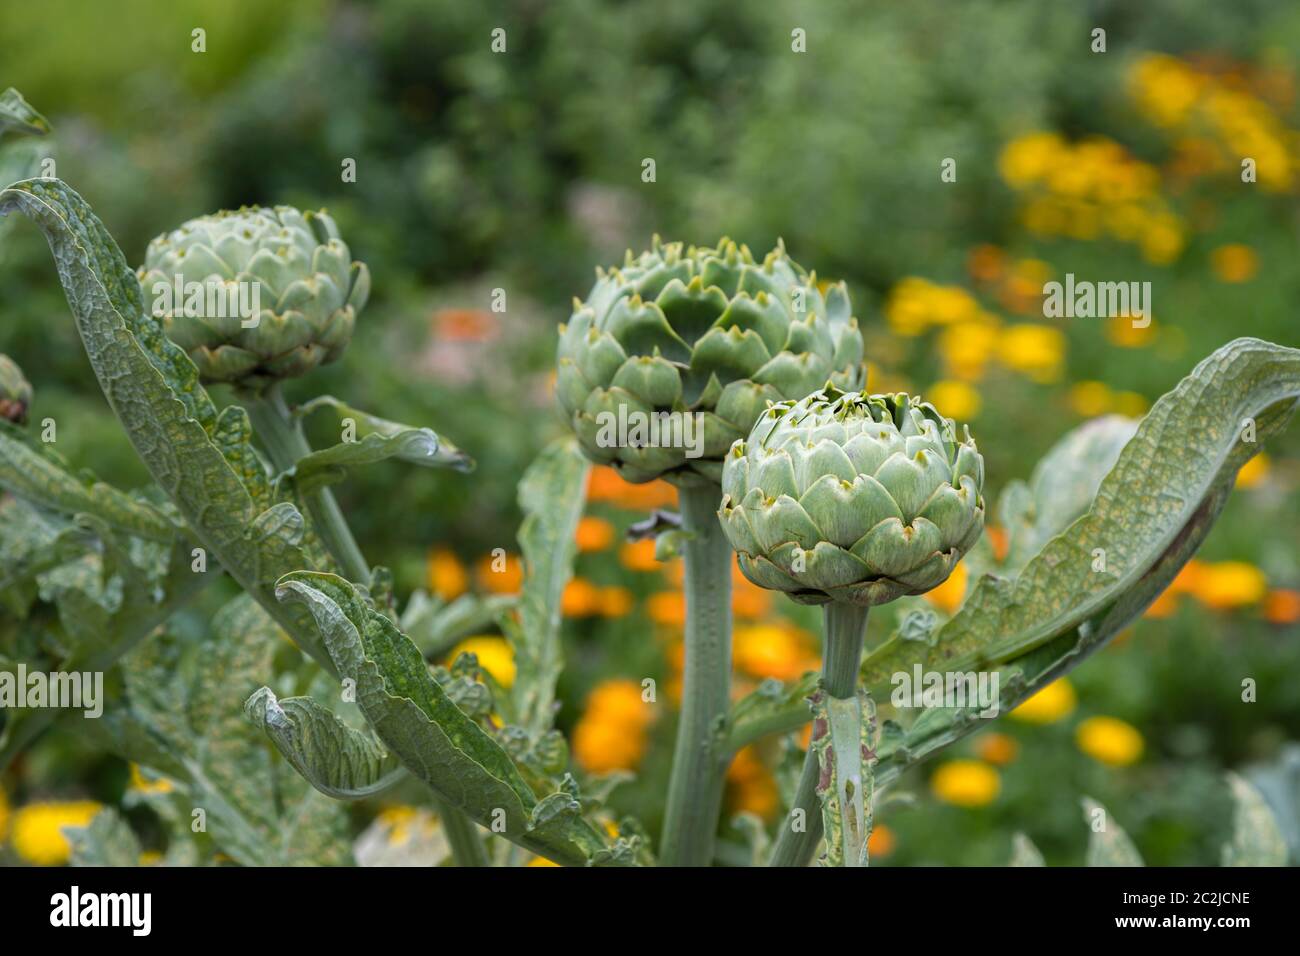 The edible buds of globe artichoke, Cynara cardunculus var. scolymus, growing in a kitchen garden in late spring / early summer in Surrey, England Stock Photo